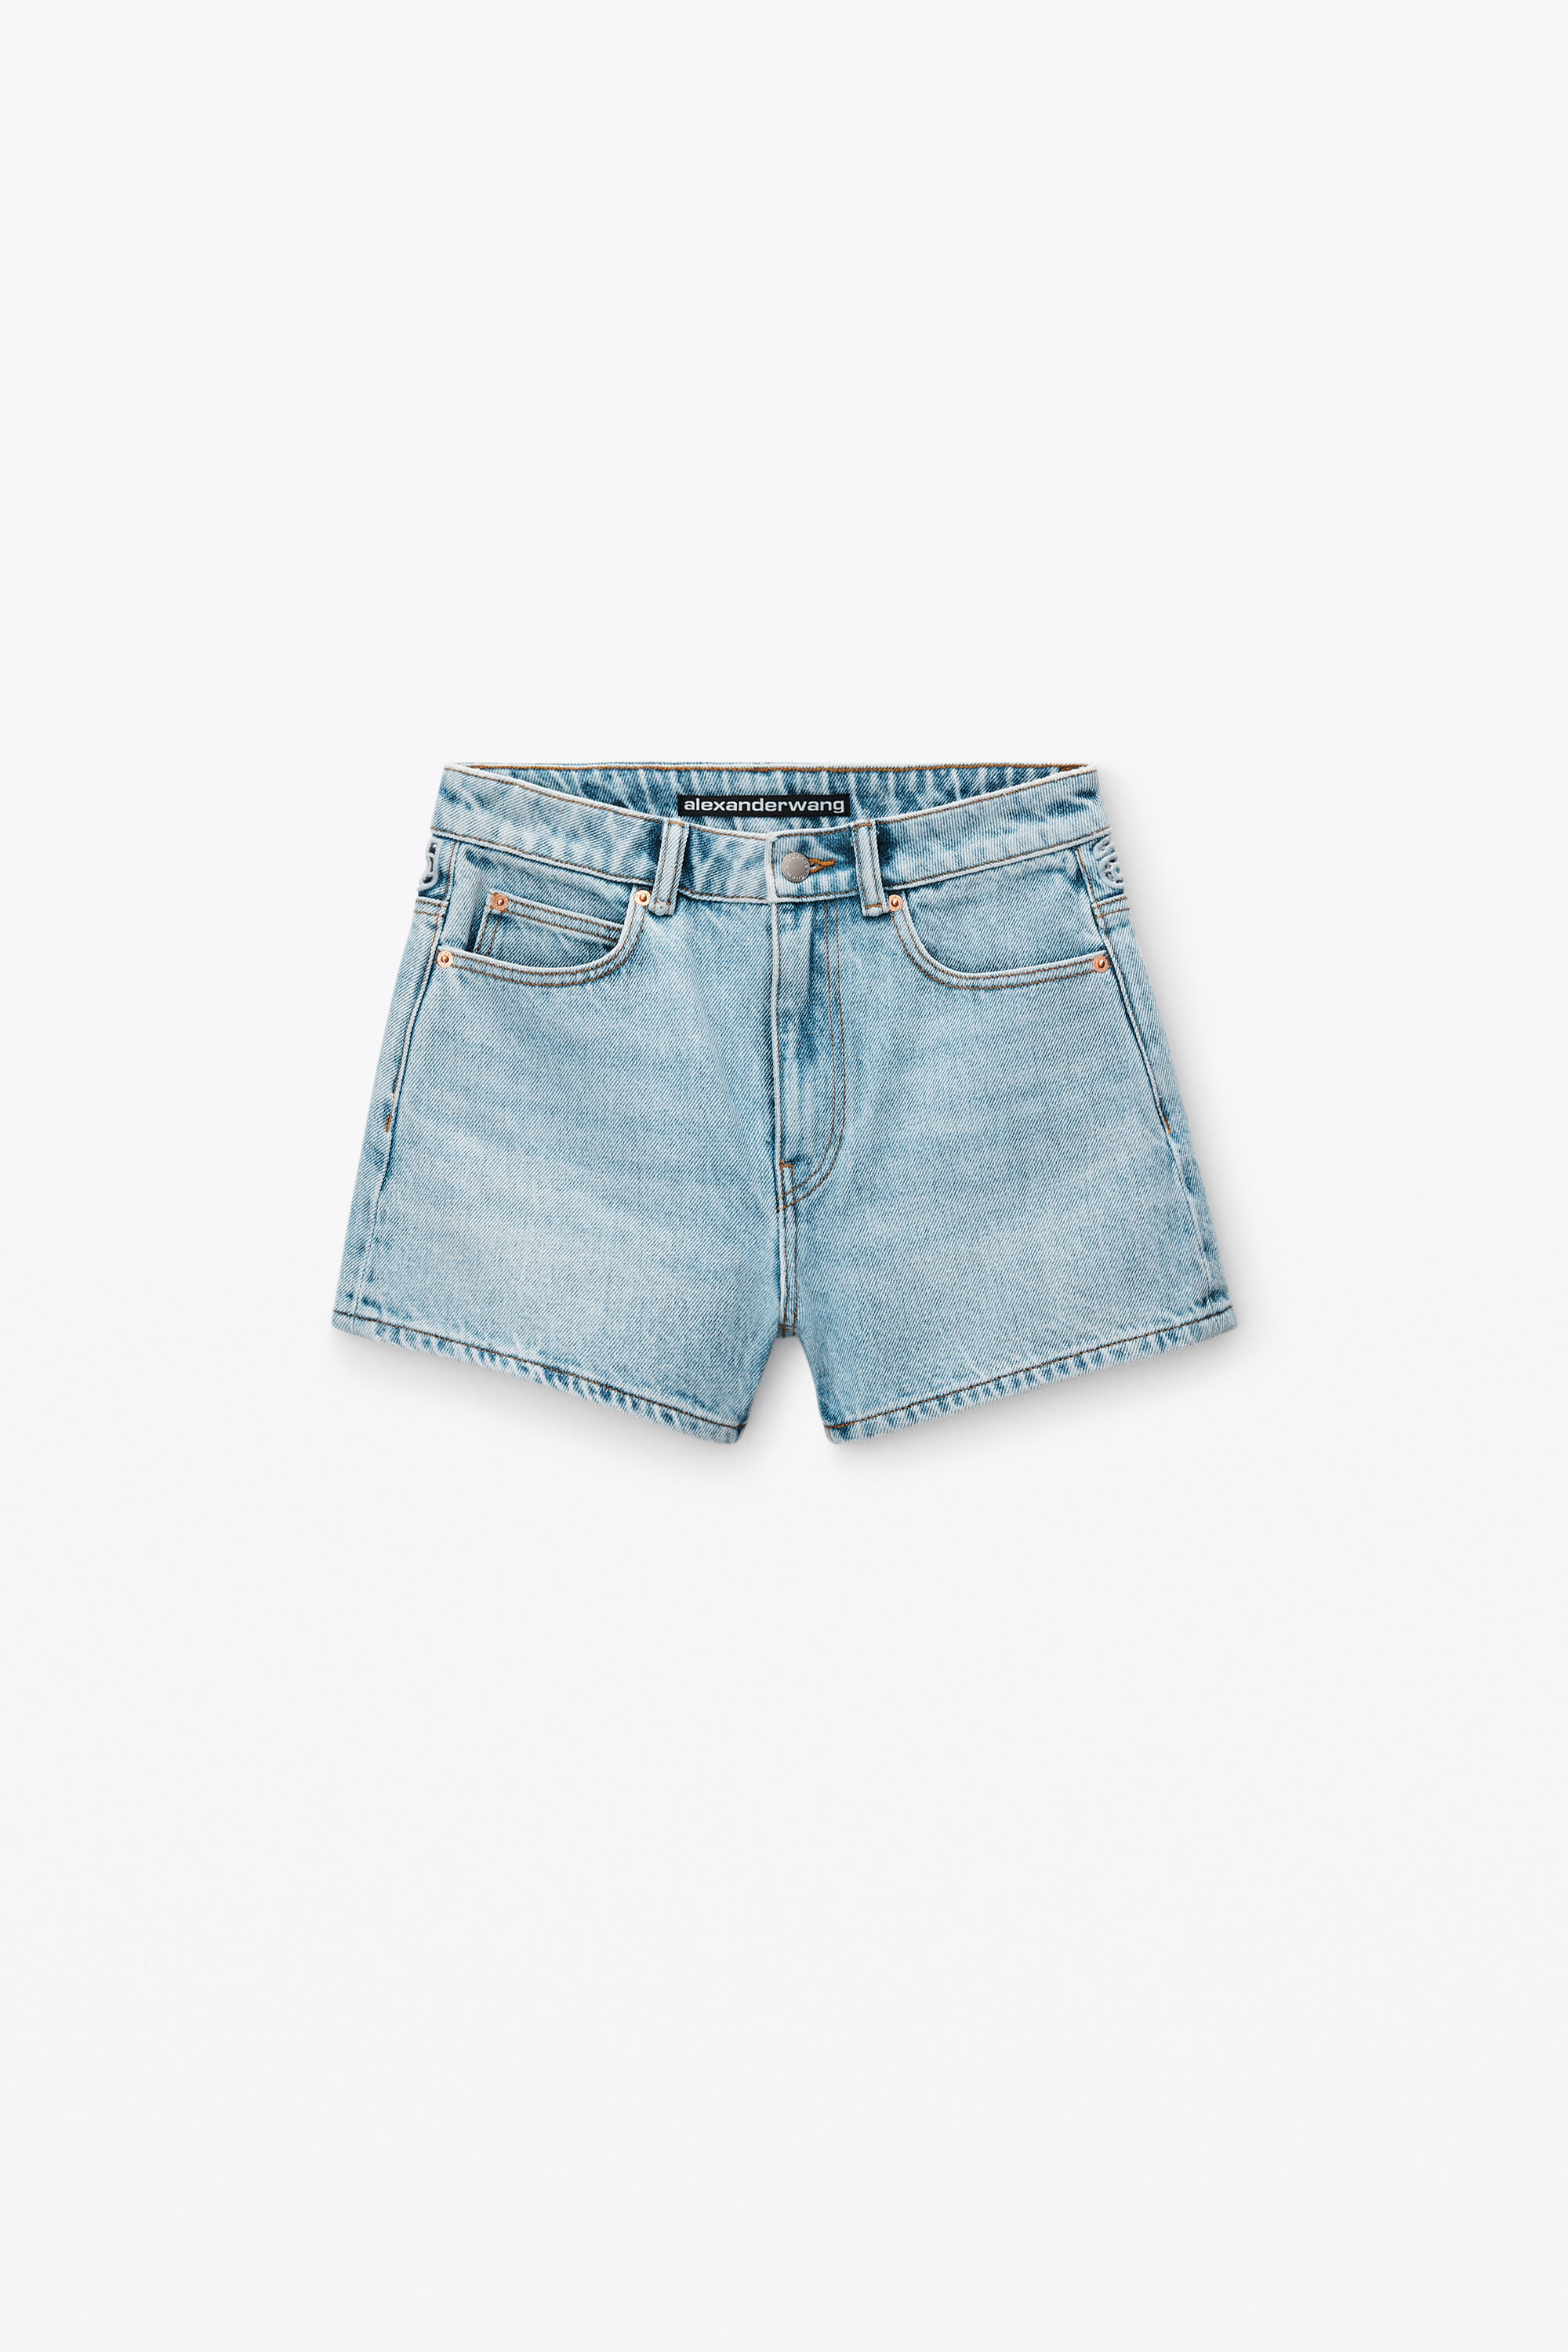 crochet cut out High Rise Shorty in Recycled Denim in BLEACH 